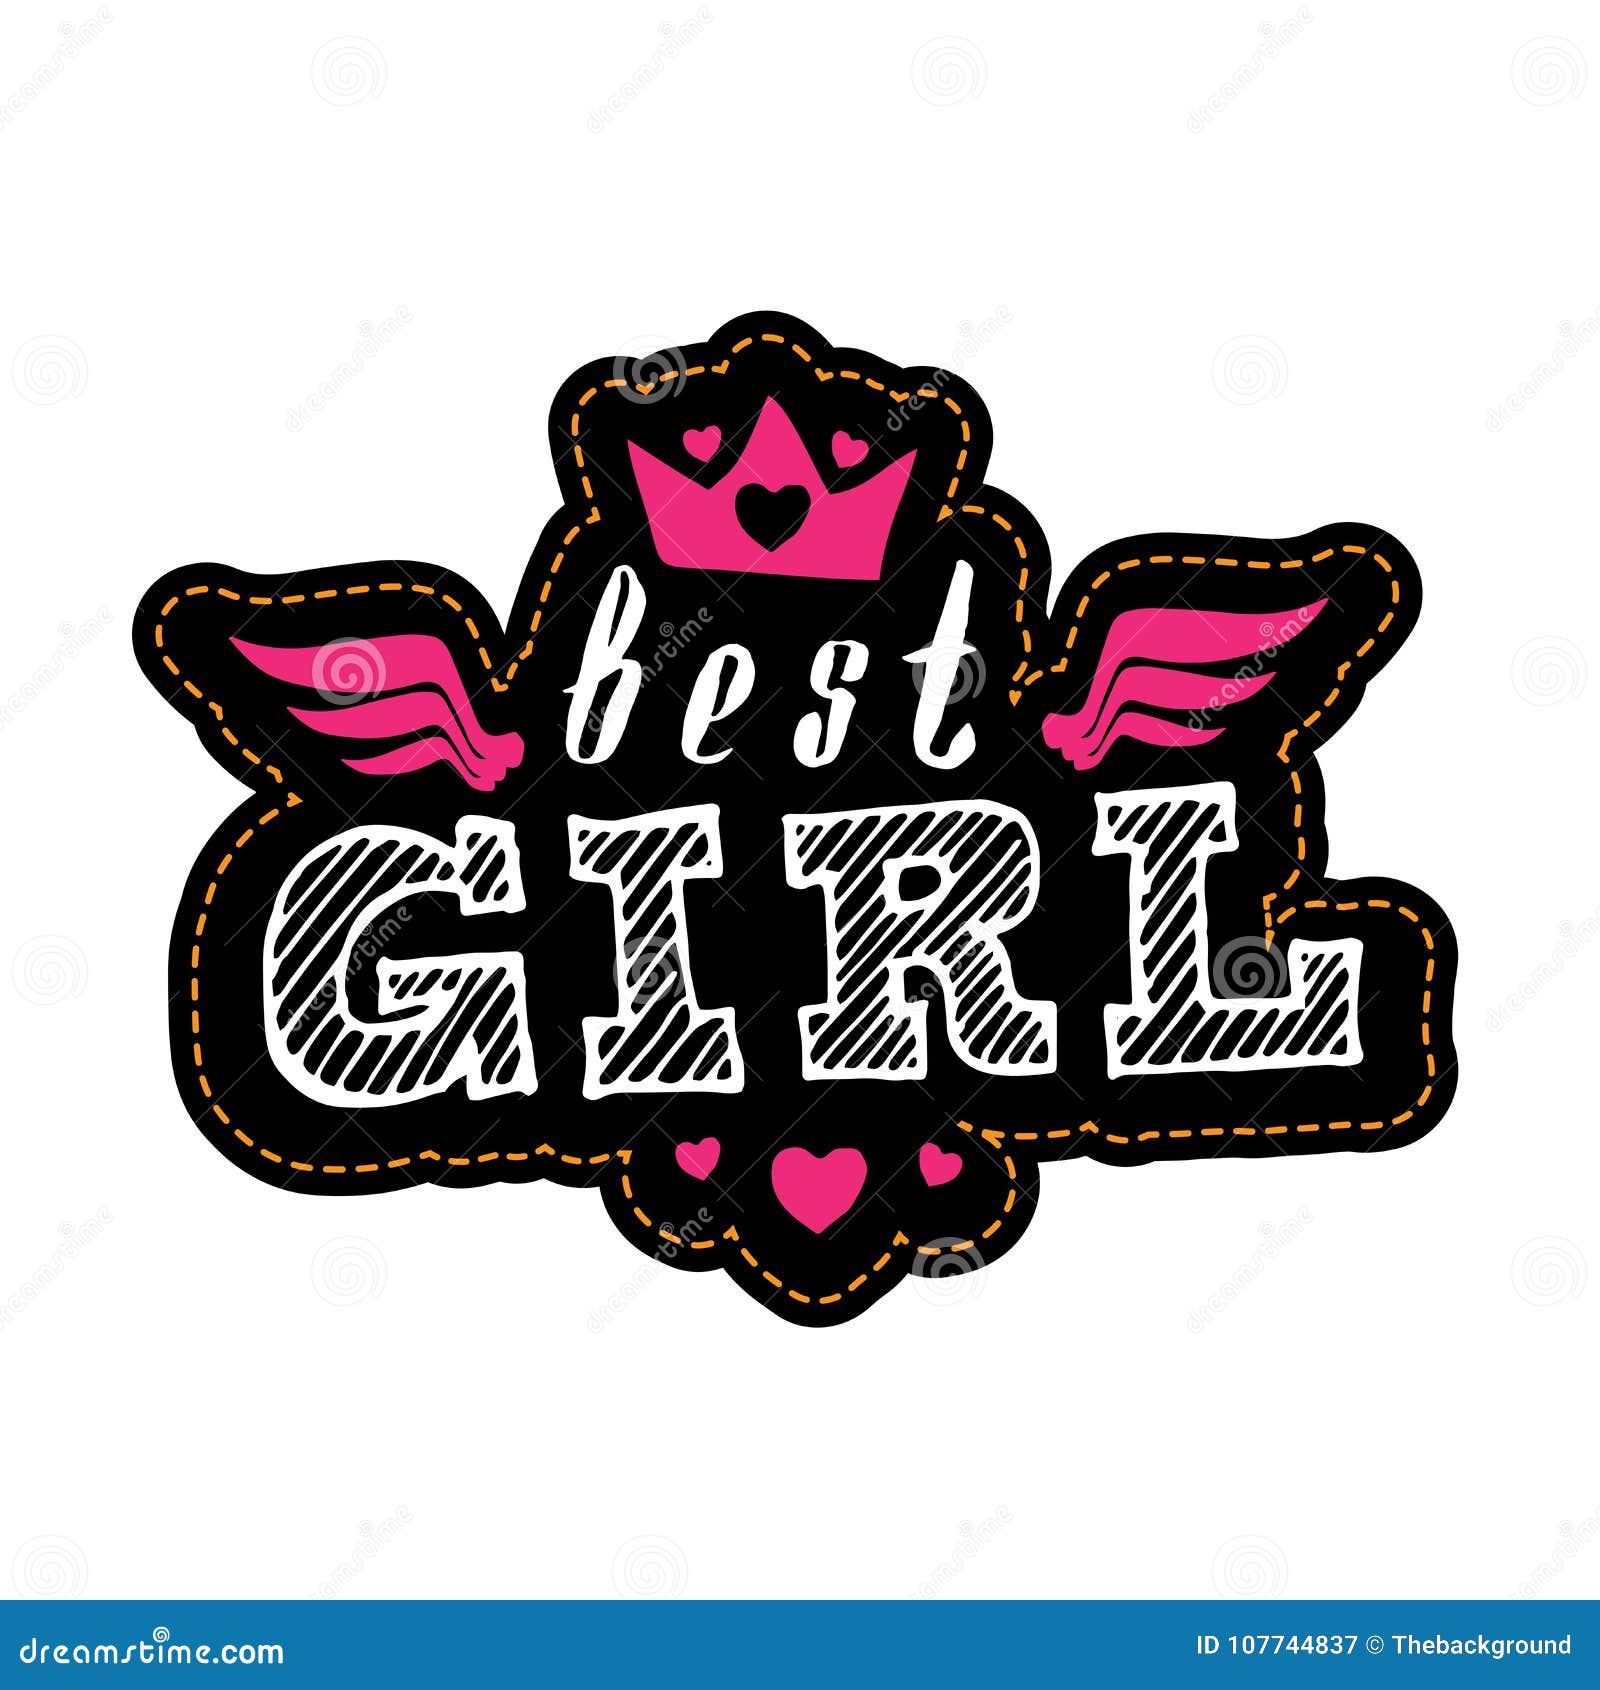 Best Girl - Vector Poster or Print for Girls Clothes. Best Girl Stock ...